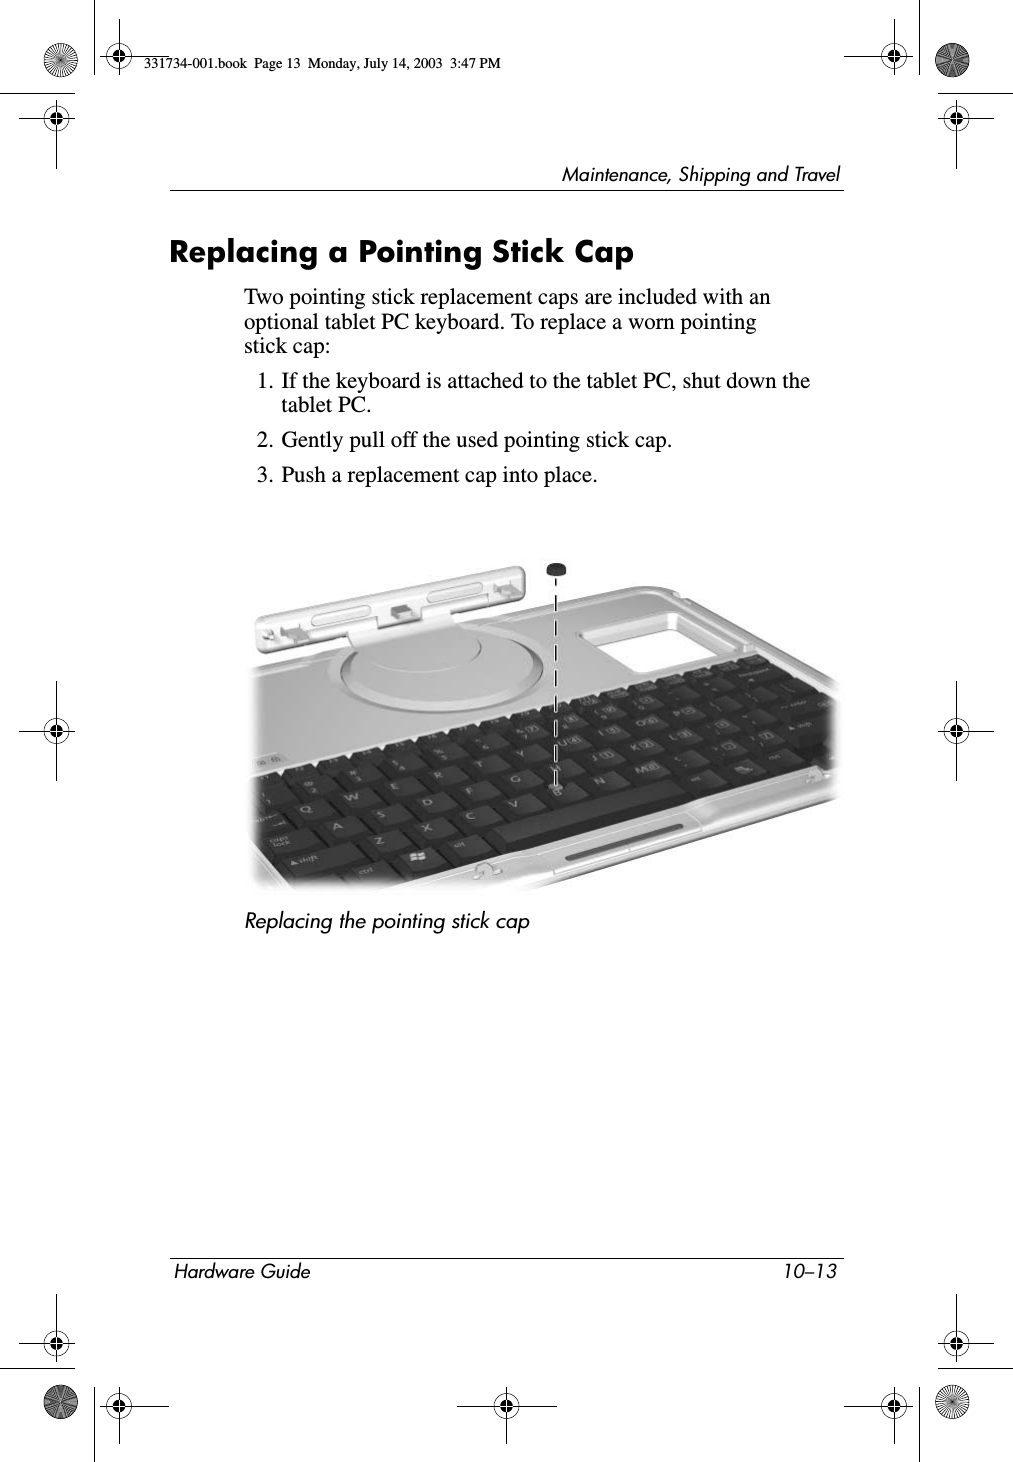 Maintenance, Shipping and TravelHardware Guide 10–13Replacing a Pointing Stick CapTwo pointing stick replacement caps are included with an optional tablet PC keyboard. To replace a worn pointing stick cap:1. If the keyboard is attached to the tablet PC, shut down the tablet PC.2. Gently pull off the used pointing stick cap.3. Push a replacement cap into place.Replacing the pointing stick cap331734-001.book  Page 13  Monday, July 14, 2003  3:47 PM